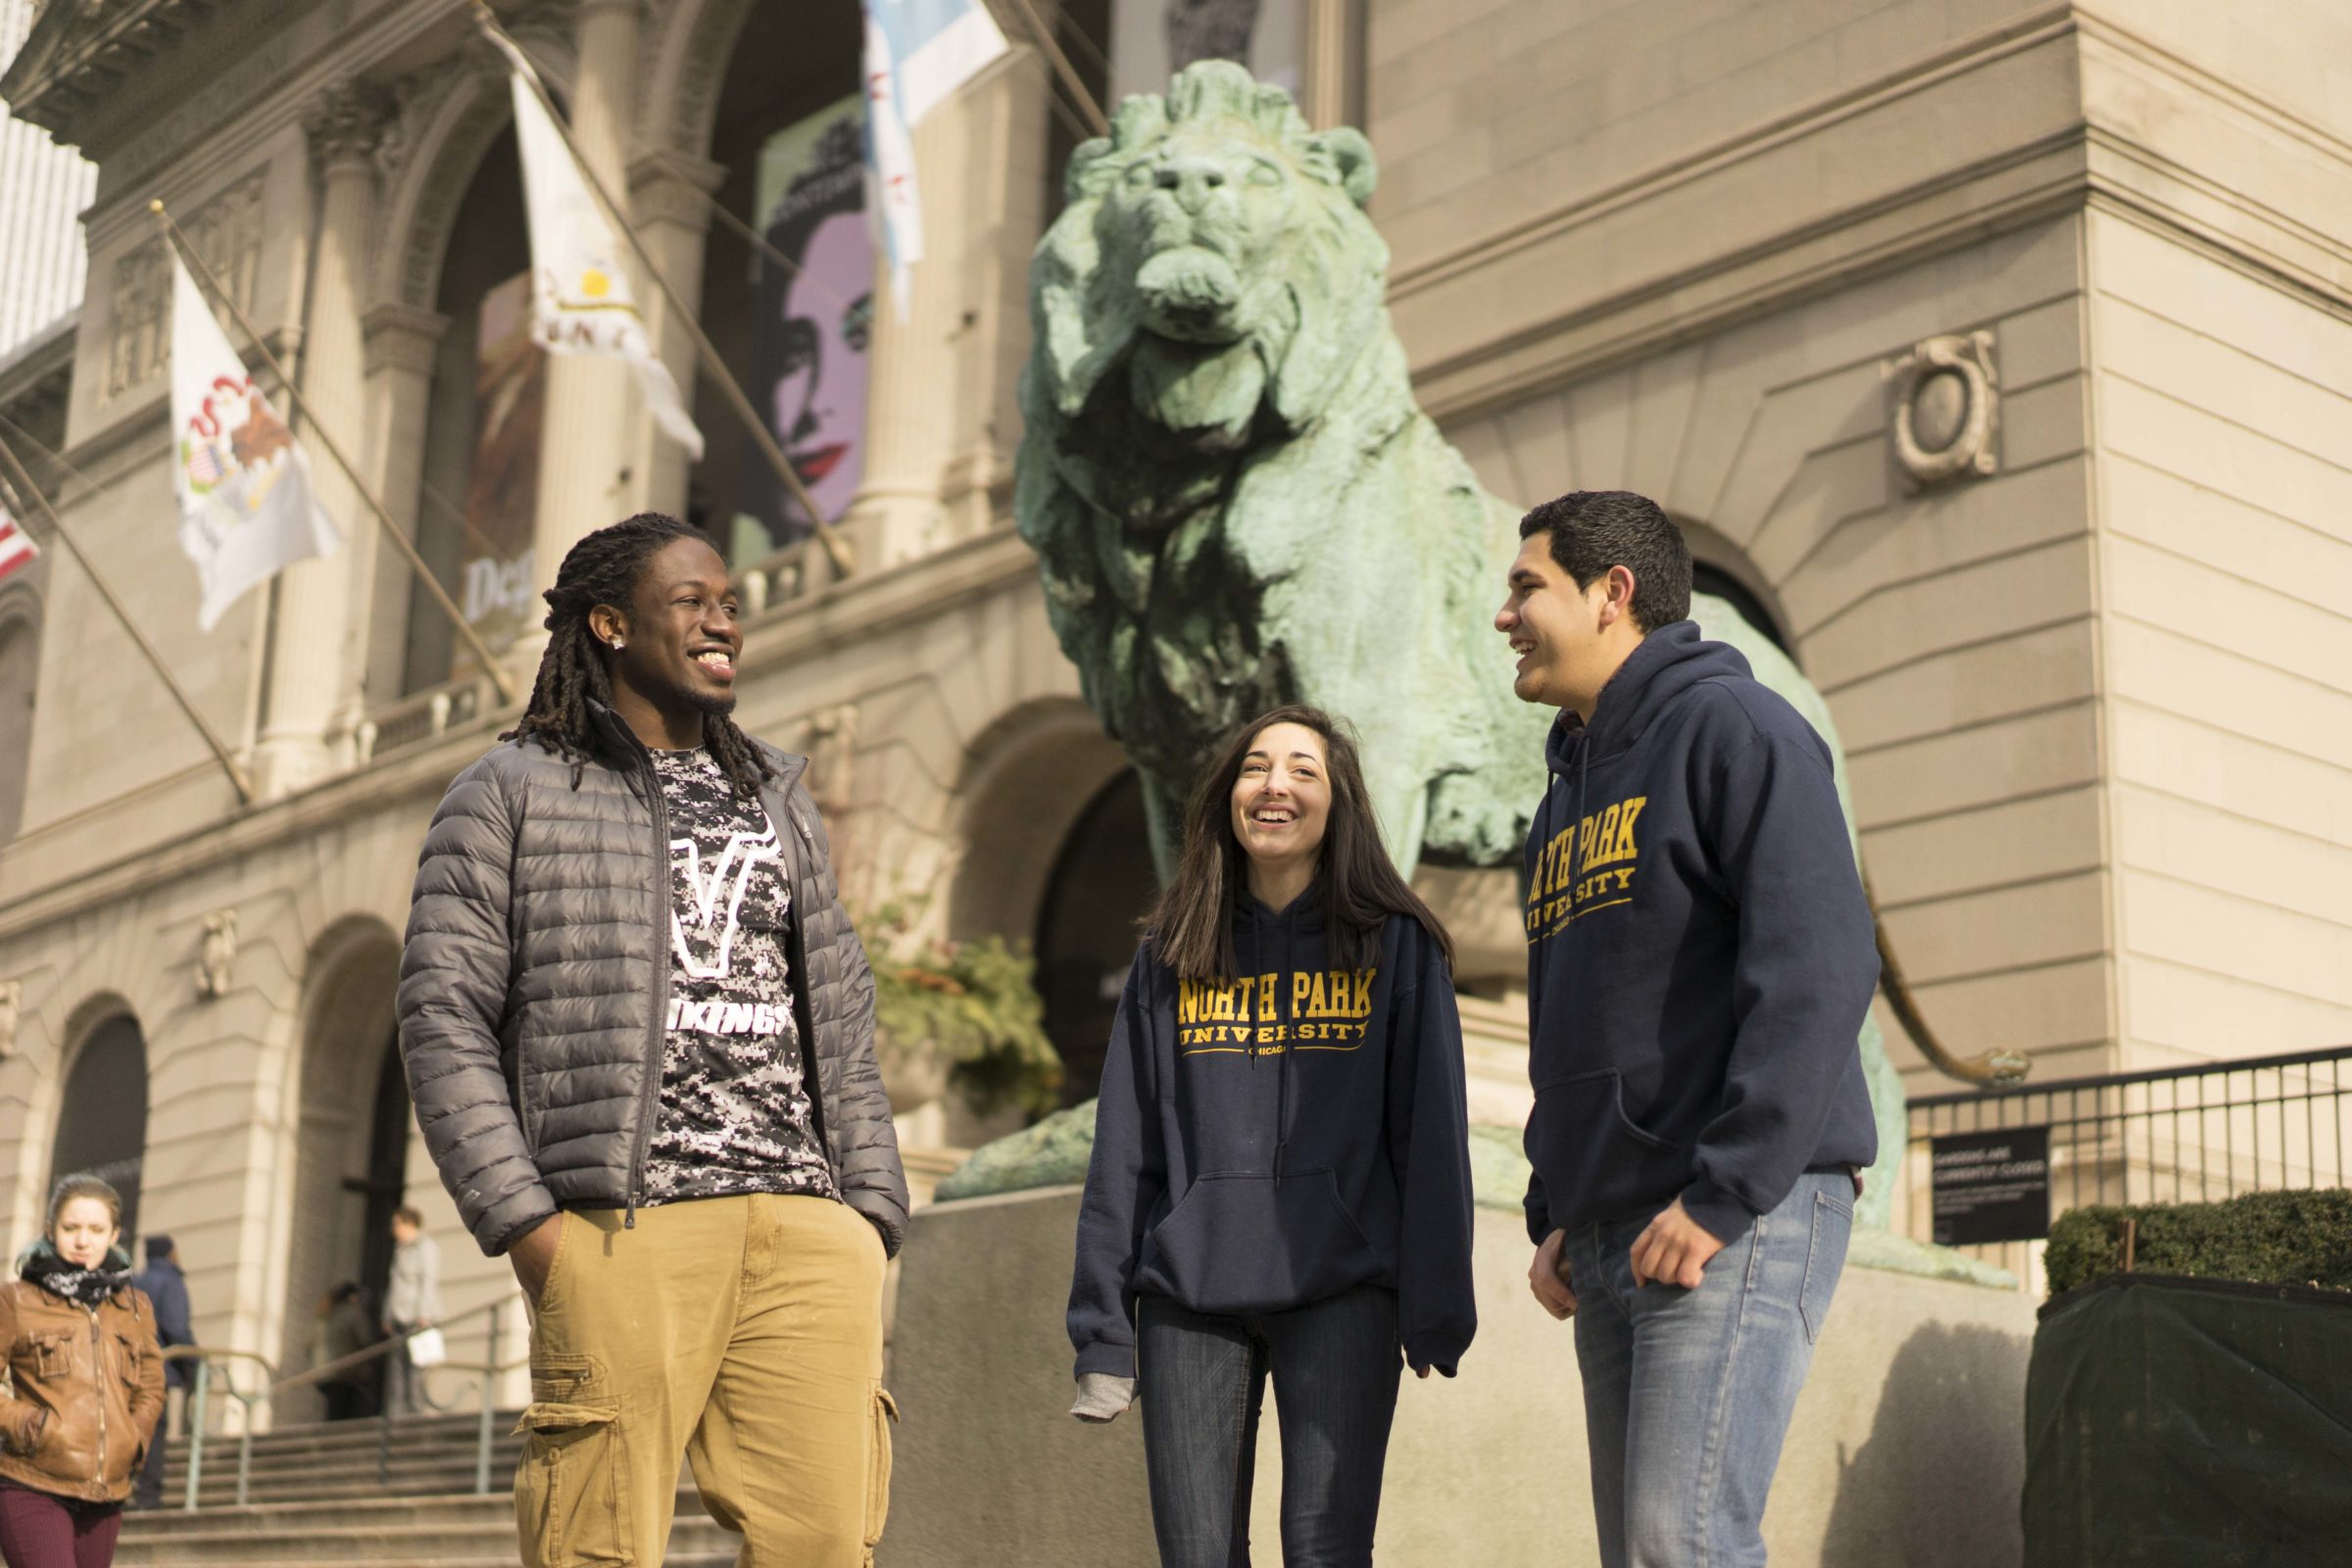 Prospective students explore North Park University and learn more about their next steps